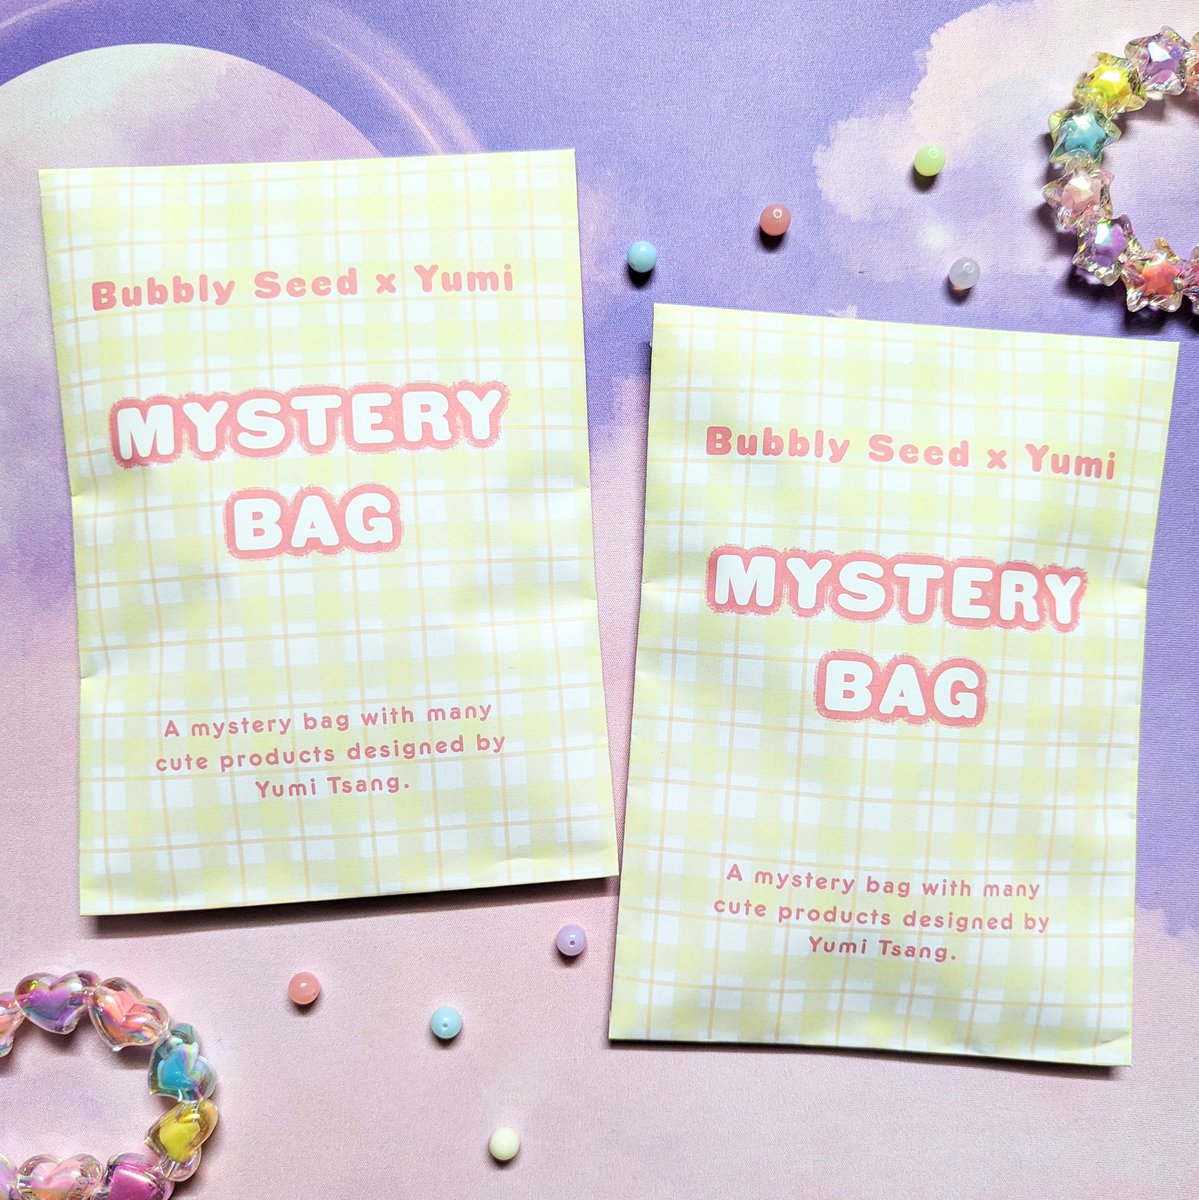 Mystery bag with many items 💖💗 Shop link in profile 😉

#mysterybag #gacha #cuteproducts #cutemerch #enamelpins #artprints #jewelry #accessories #stickers #patch #kawaii #cute #art #supportsmallbusiness #shopsmall